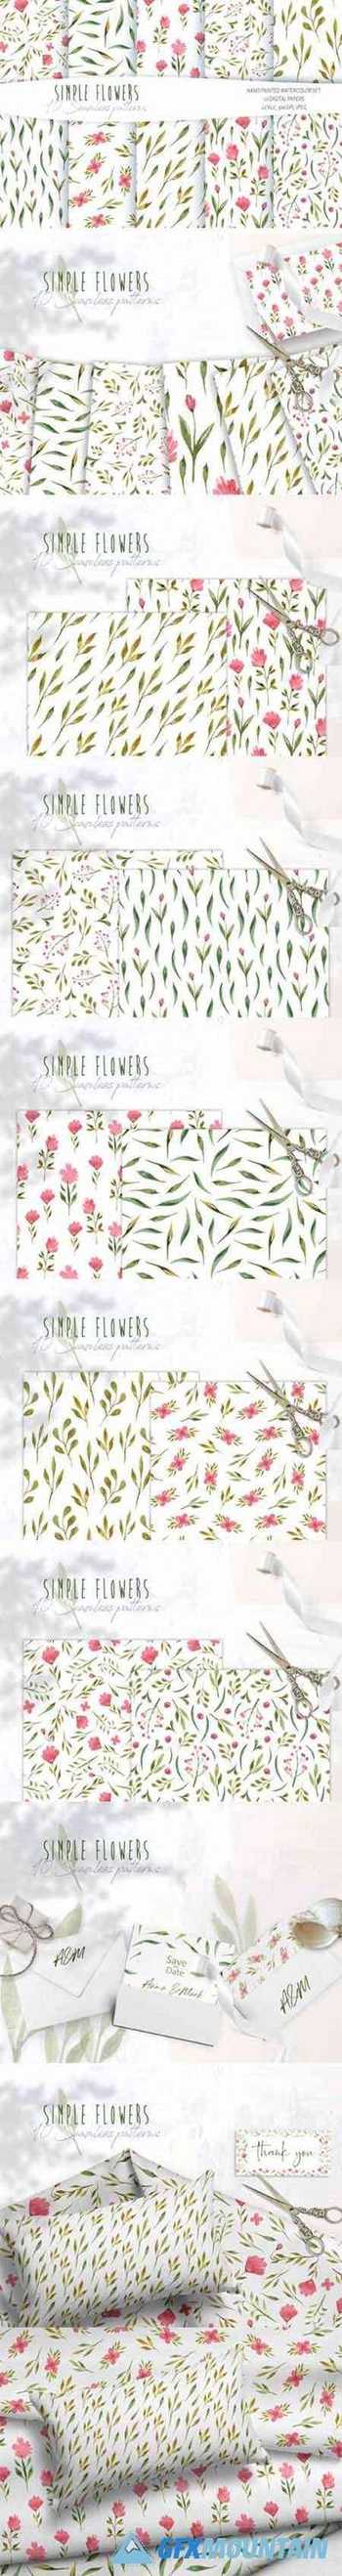 Watercolor Floral Seamless Patterns 8039396